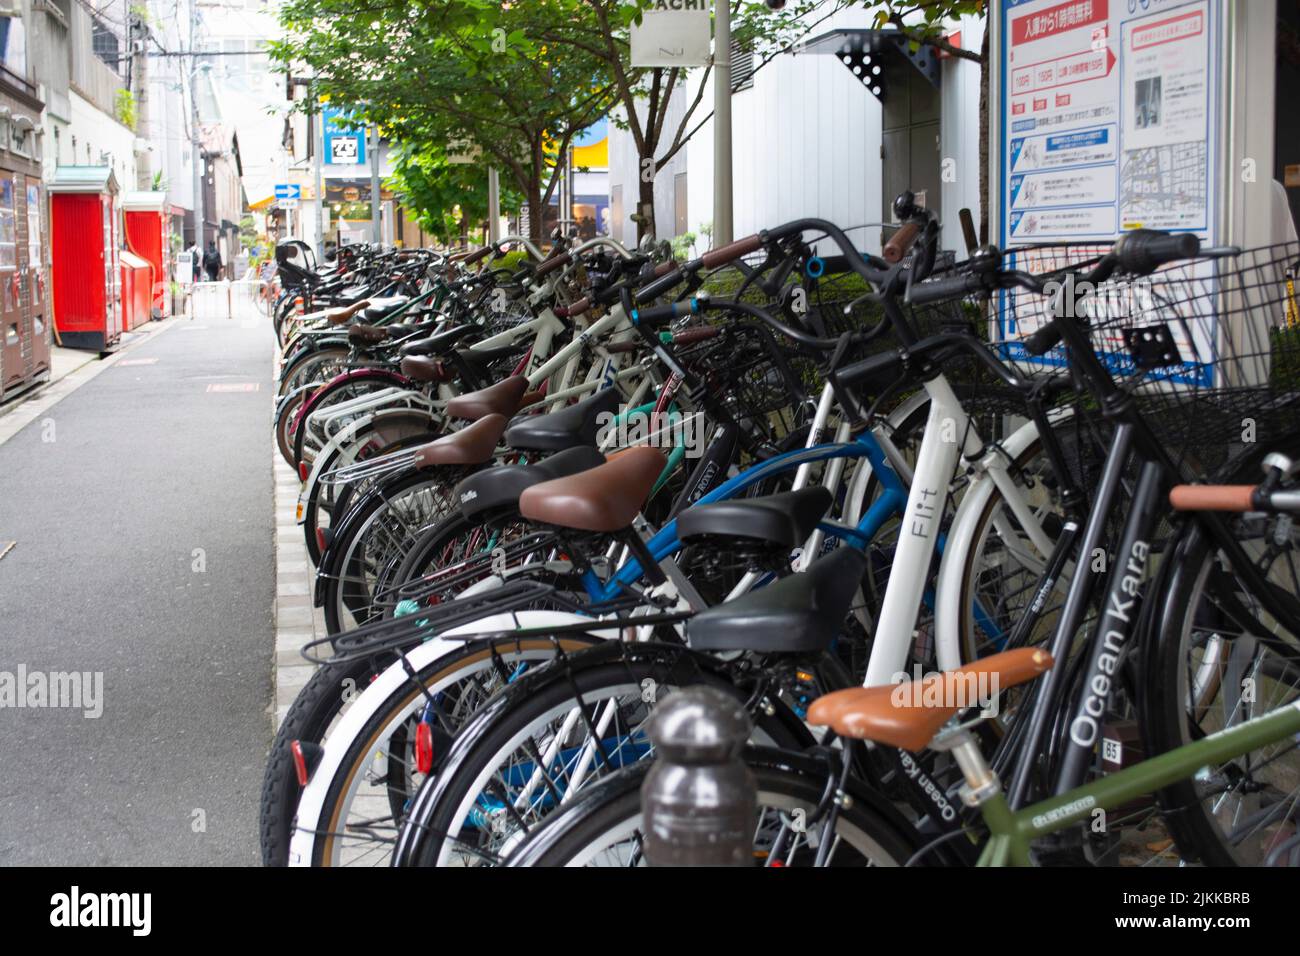 Bikes lined up in wrack on side street in Japan Stock Photo